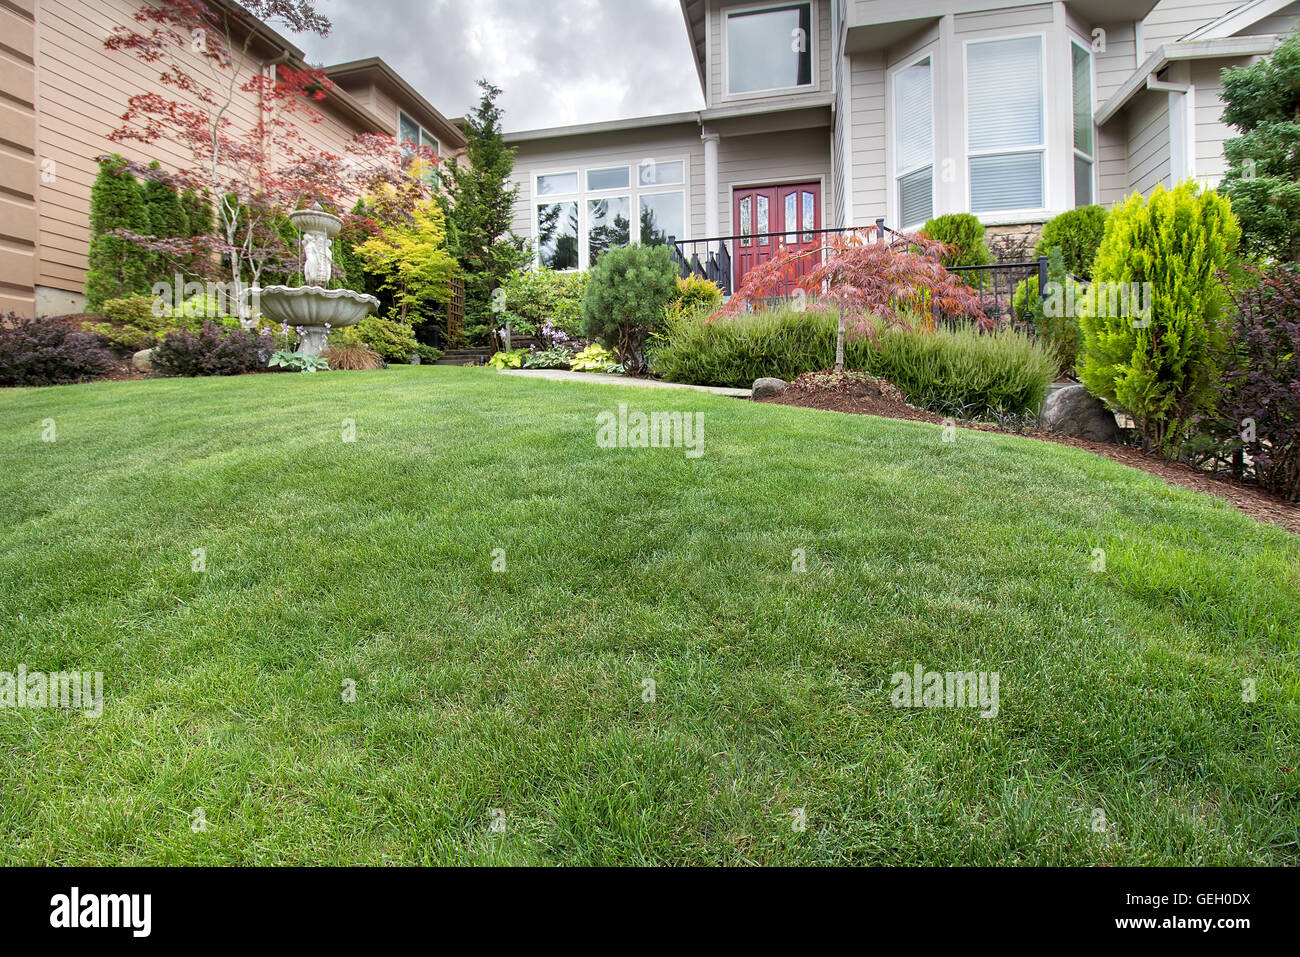 Green Grass Lawn in house front yard manicured garden with water fountain trees plant shrubs rocks in landscaping Stock Photo